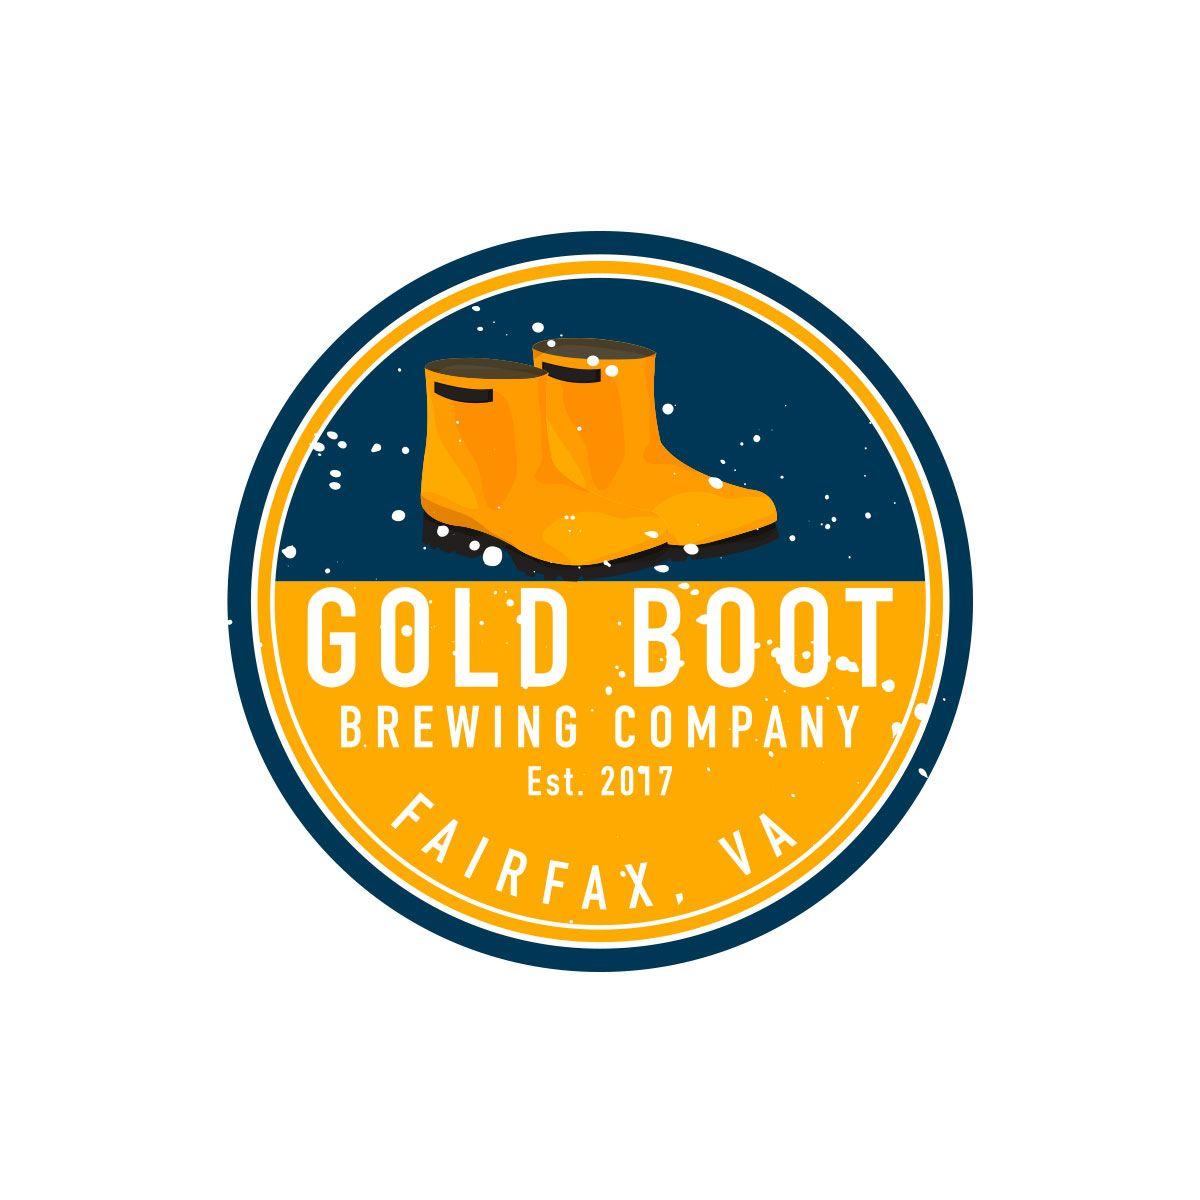 Gold V Company Logo - Personable, Colorful, It Company Logo Design for Gold Boot Brewing